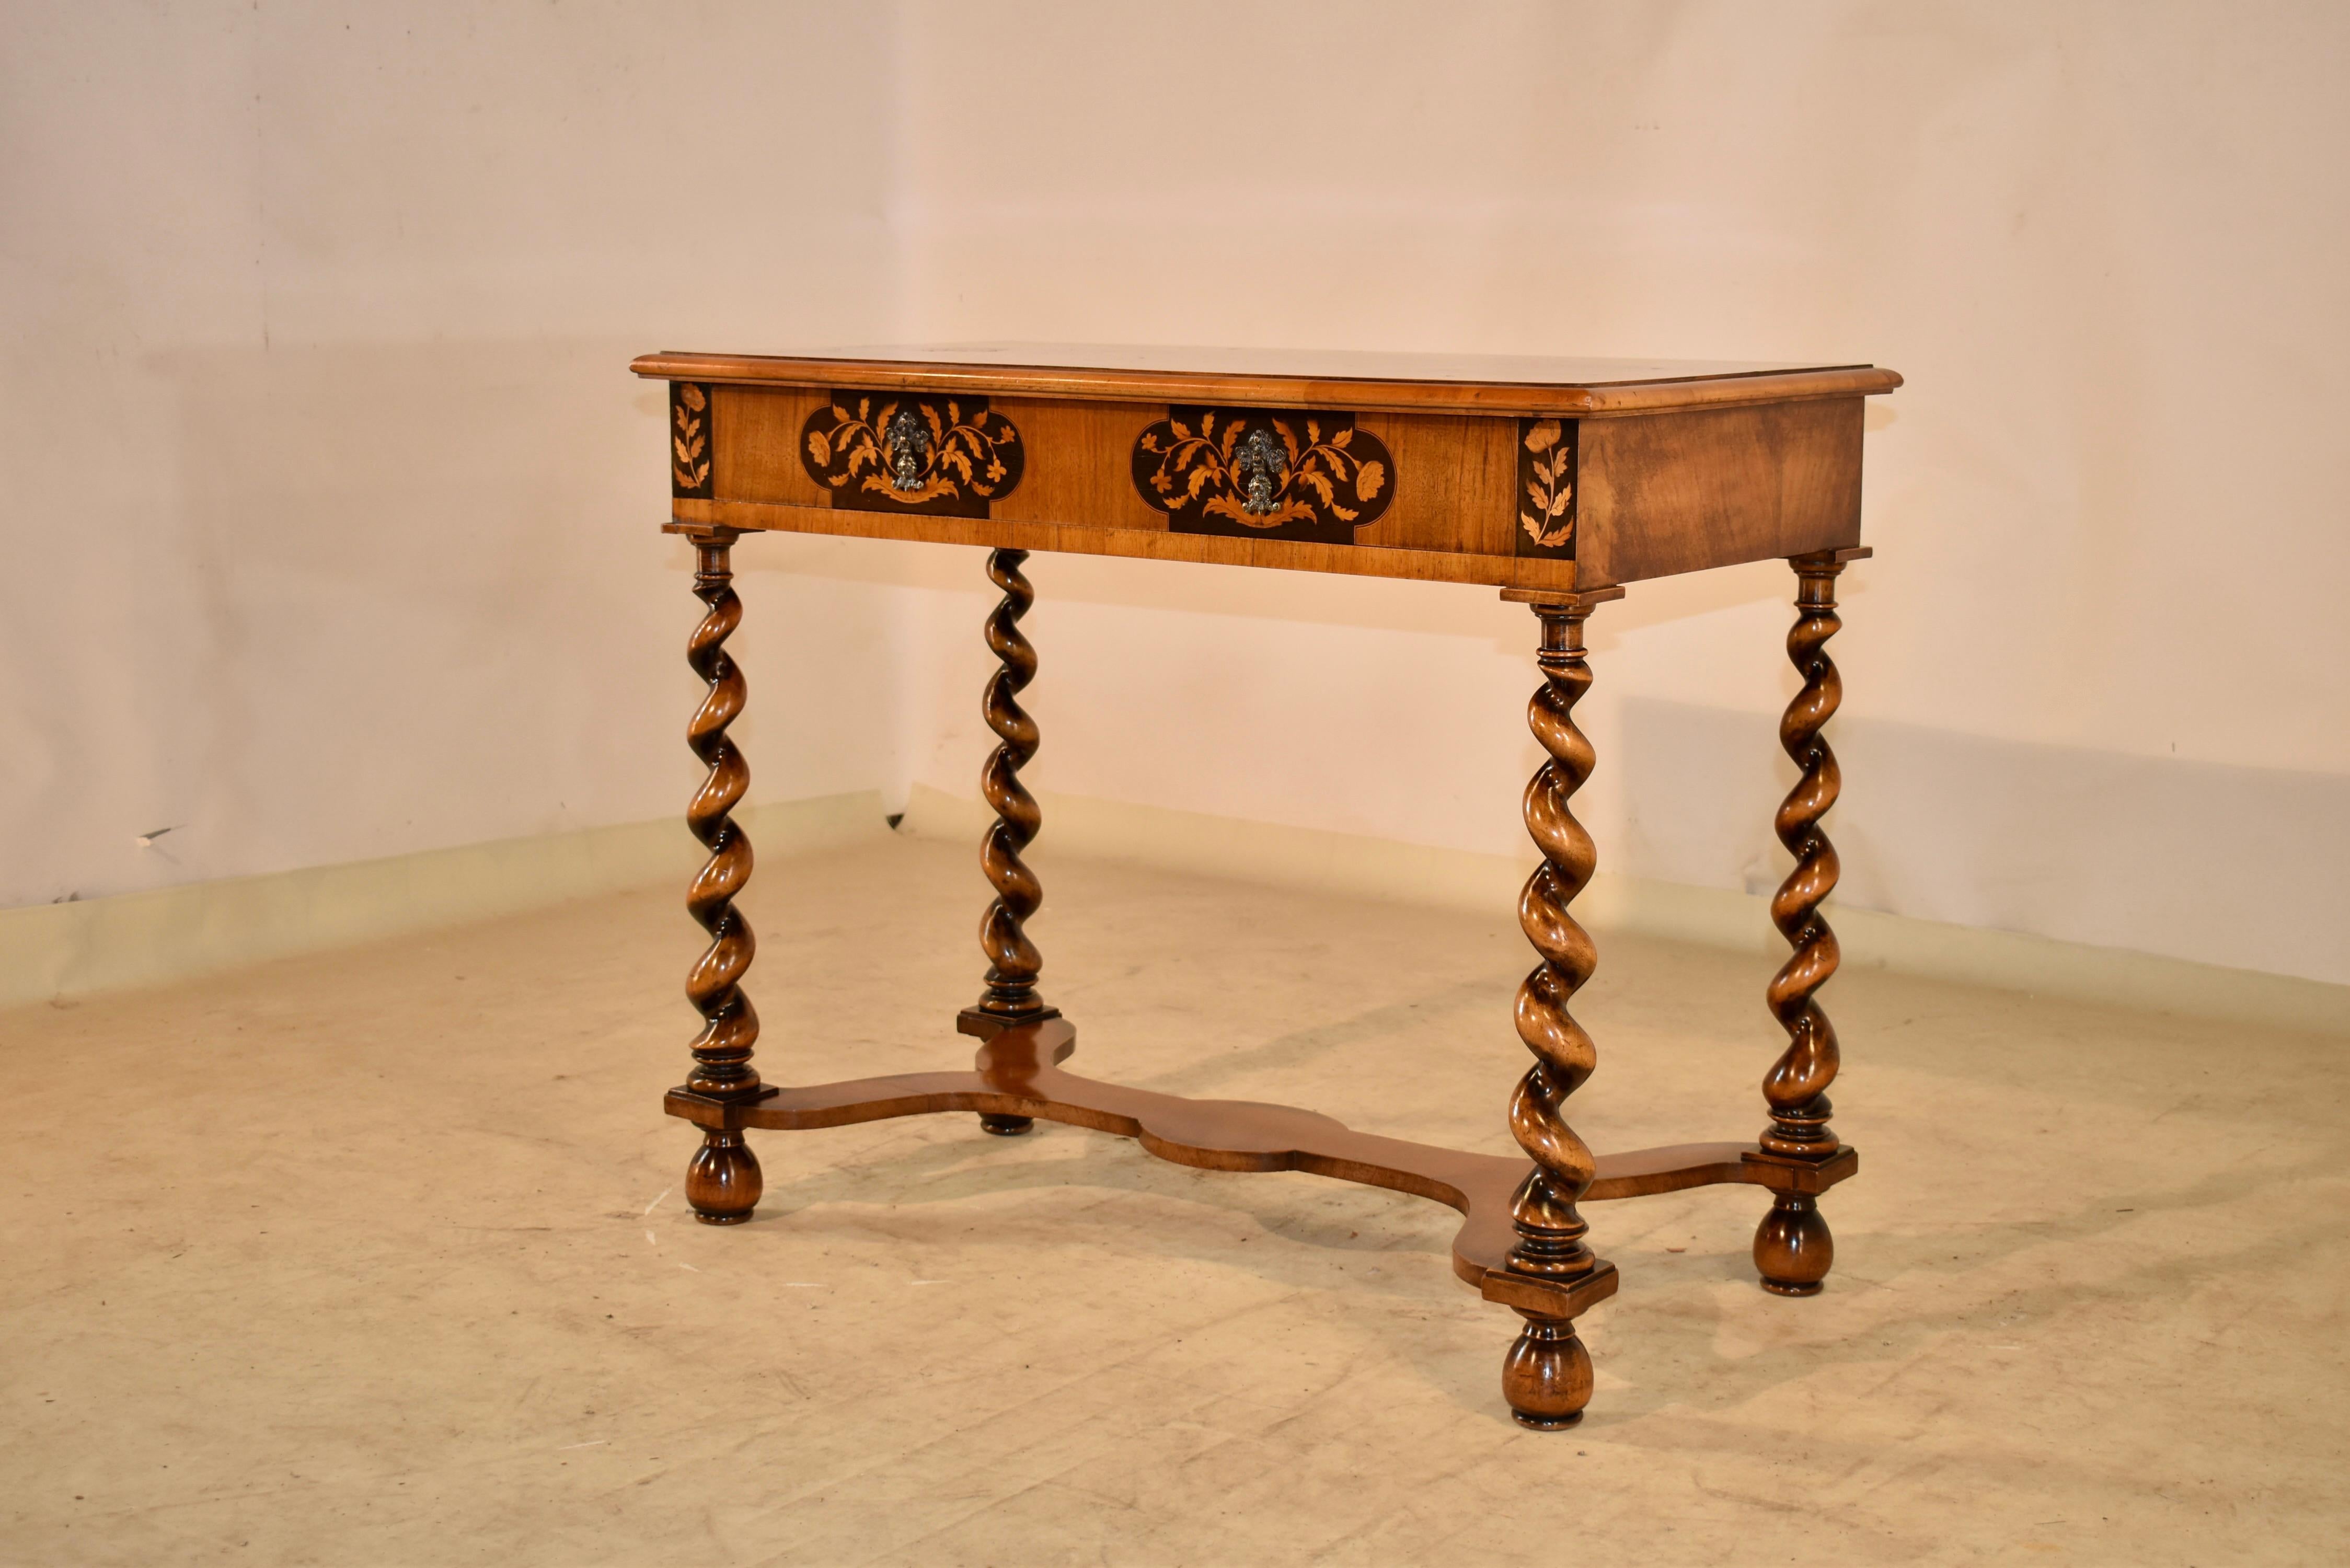 Early 20th Century Edwardian English Marquetry Side Table, c. 1900 For Sale